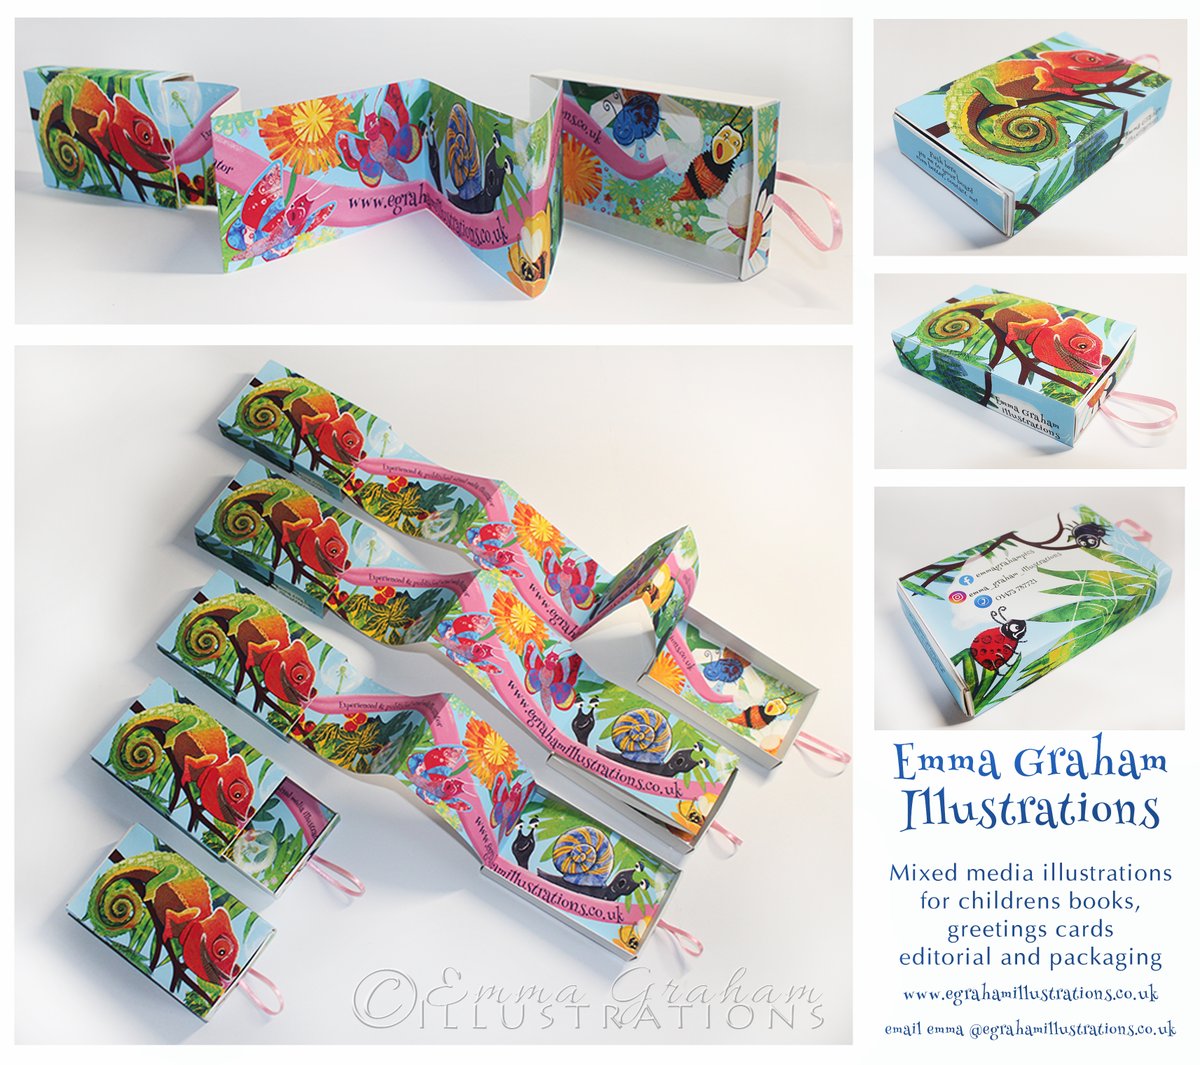 I've created a 3d mailer, to promote my #illustration work, to 'snail mail' to publishers & agencies. Something to catch the eye, make them smile, pin to their boards (& give them an 'earworm') #publisher #packager #illustrationagent #designcompany